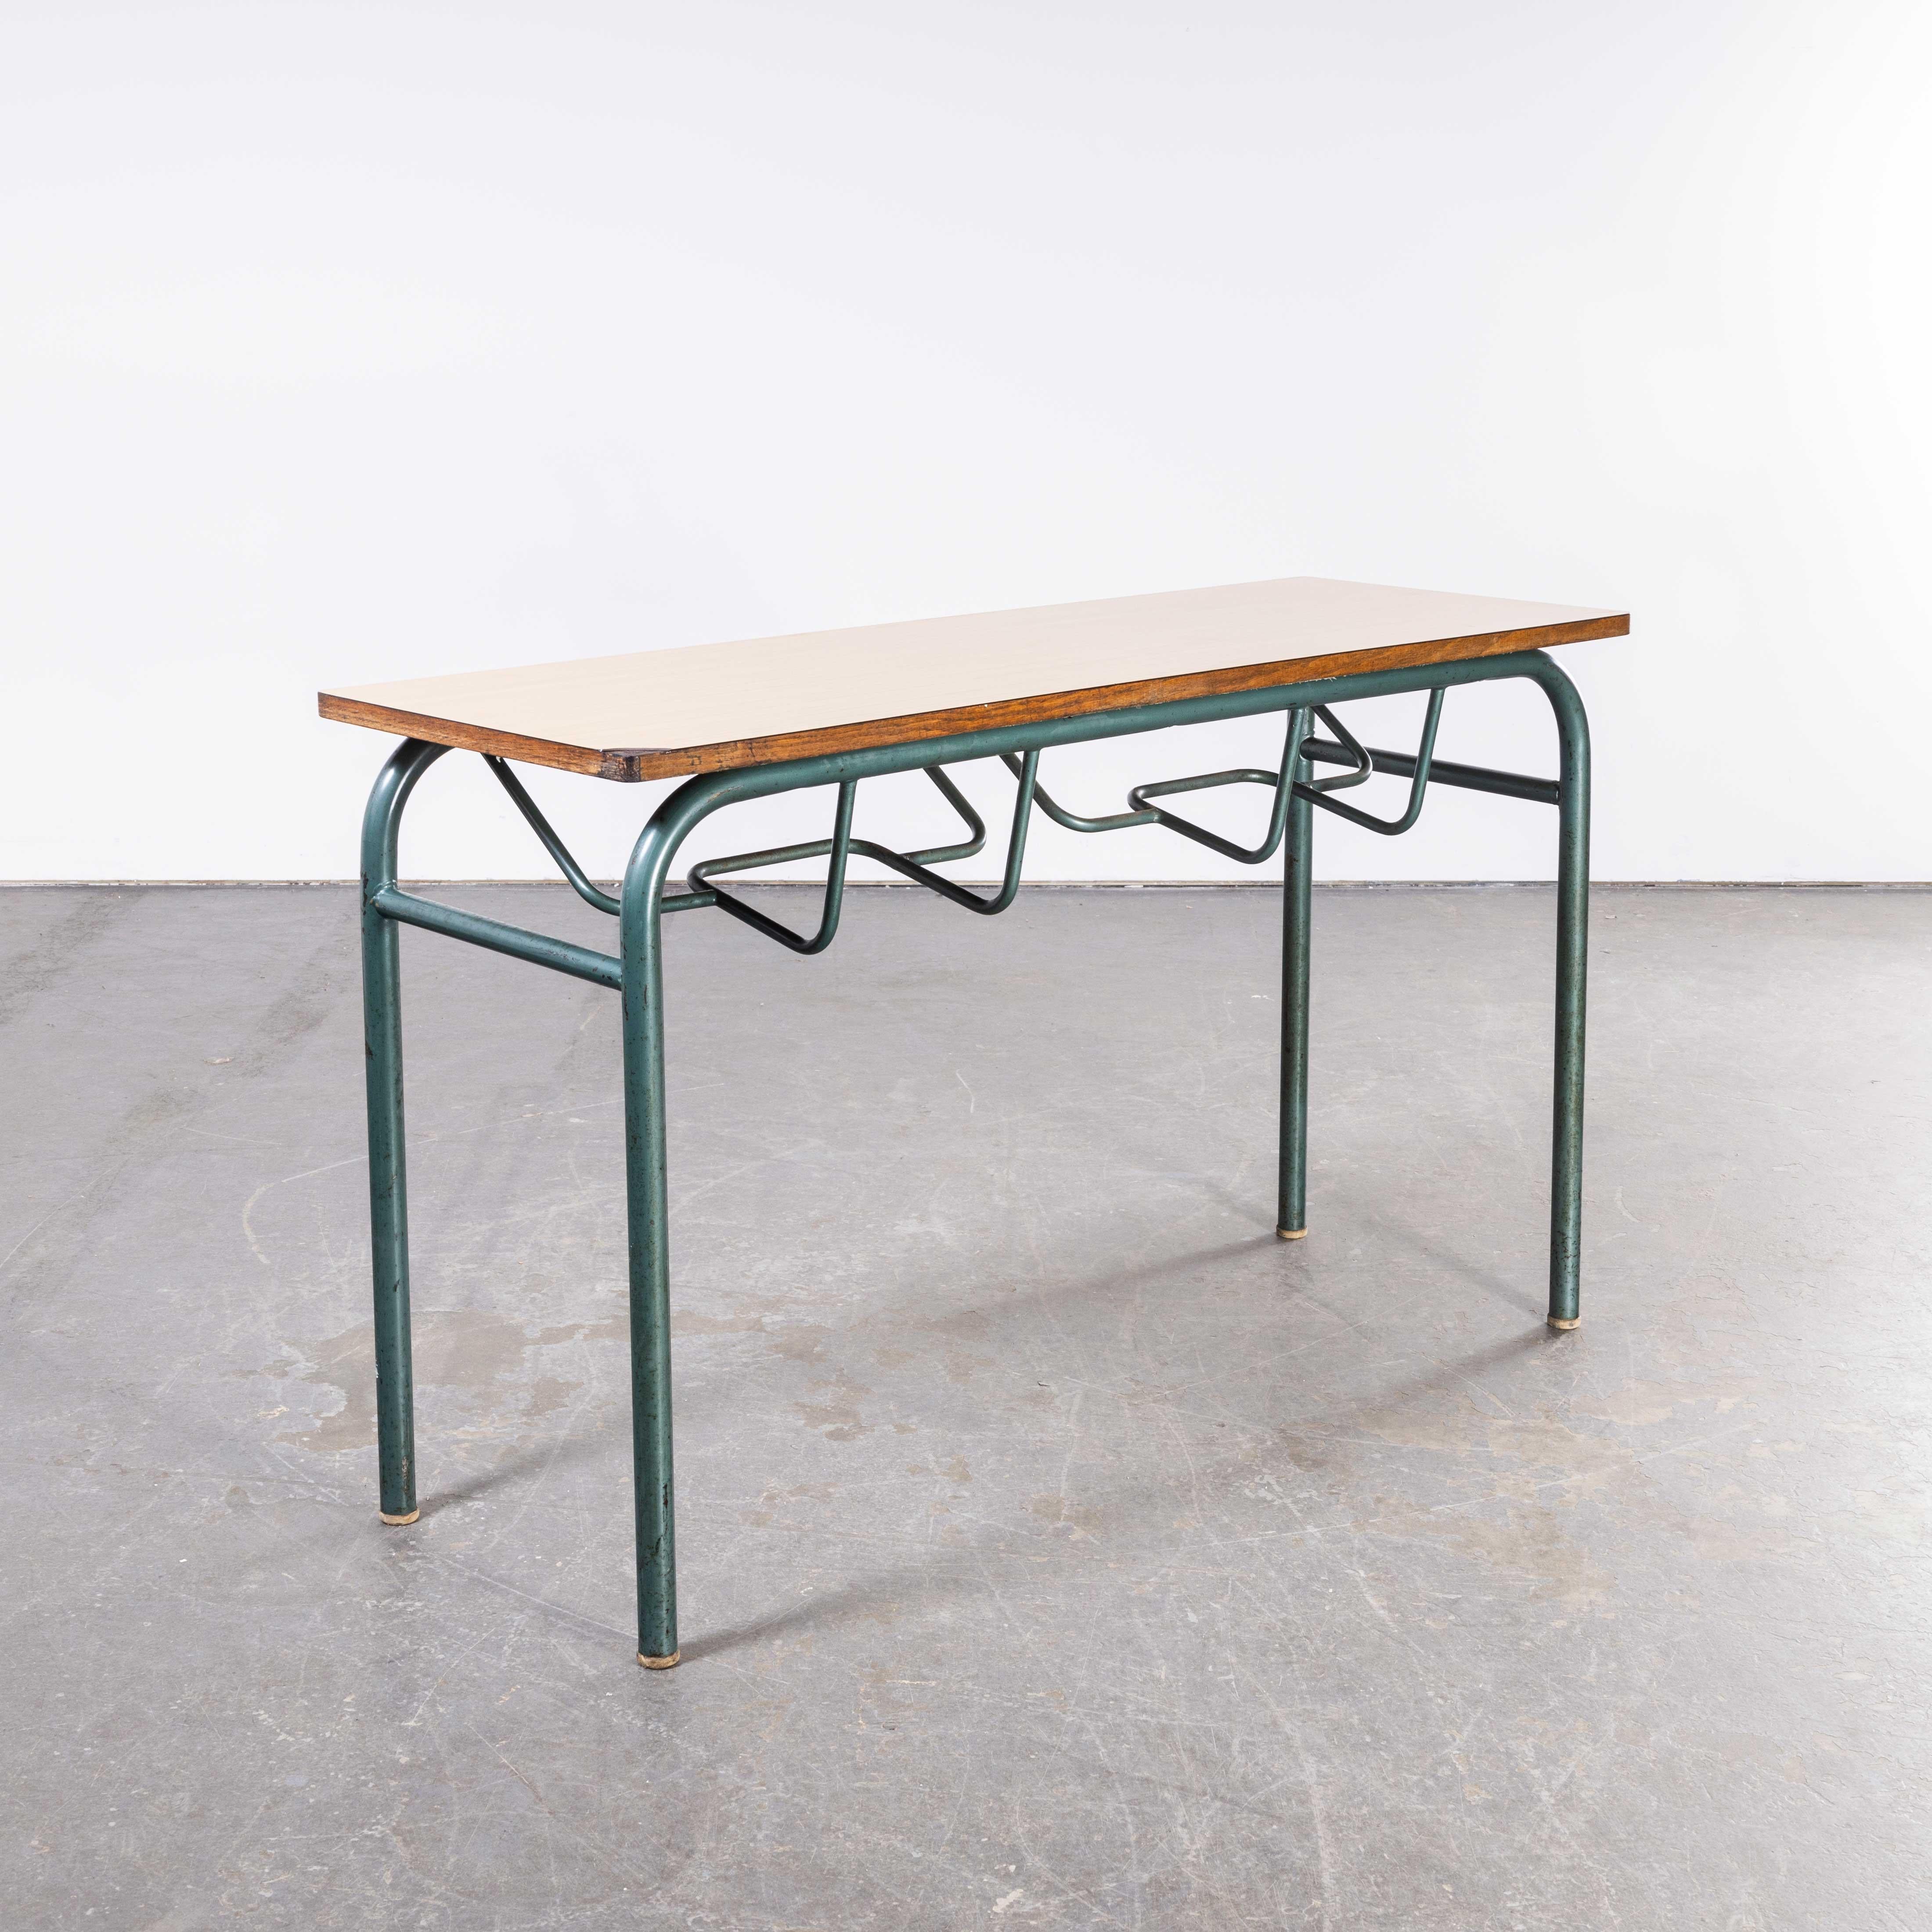 1960’s French mid-century Mullca School Desk – console table 

1960’s French mid-century Mullca School Desk – console table. In 1947 Robert Muller and Gaston Cavaillon created the company that went on to develop arguably the most famous French